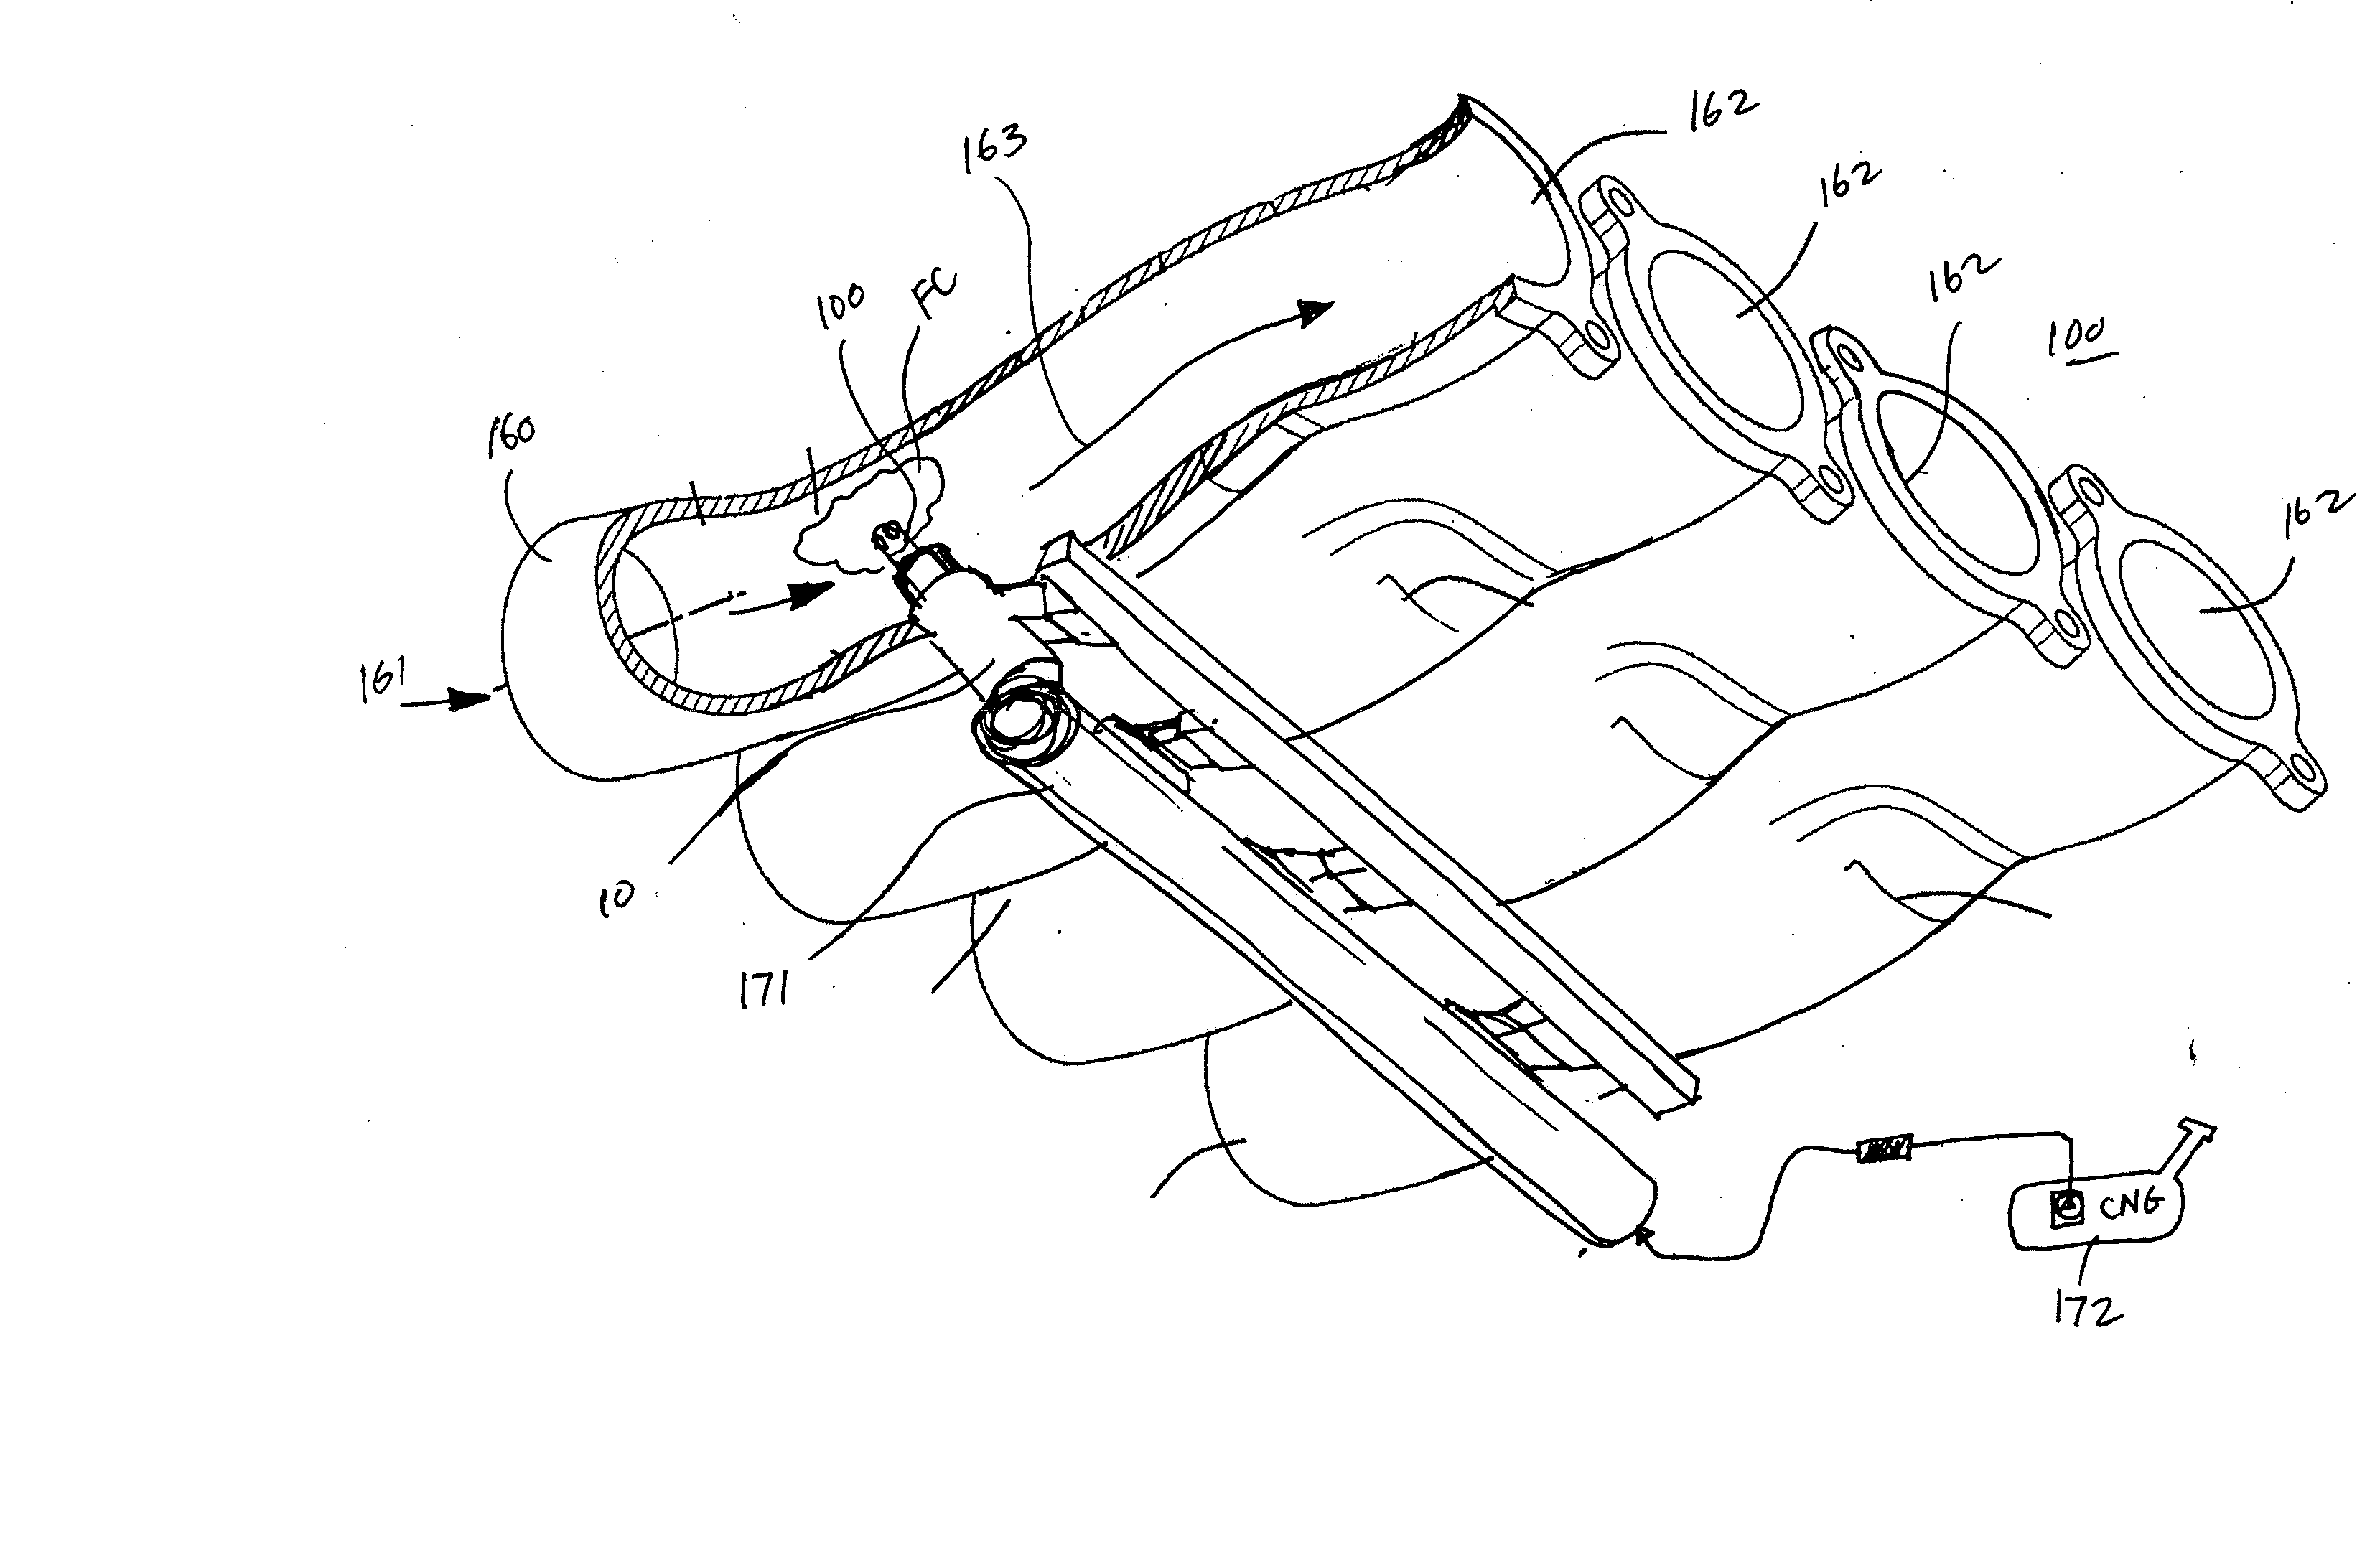 Fuel injection system with cross-flow nozzle for enhanced compressed natural gas jet spray